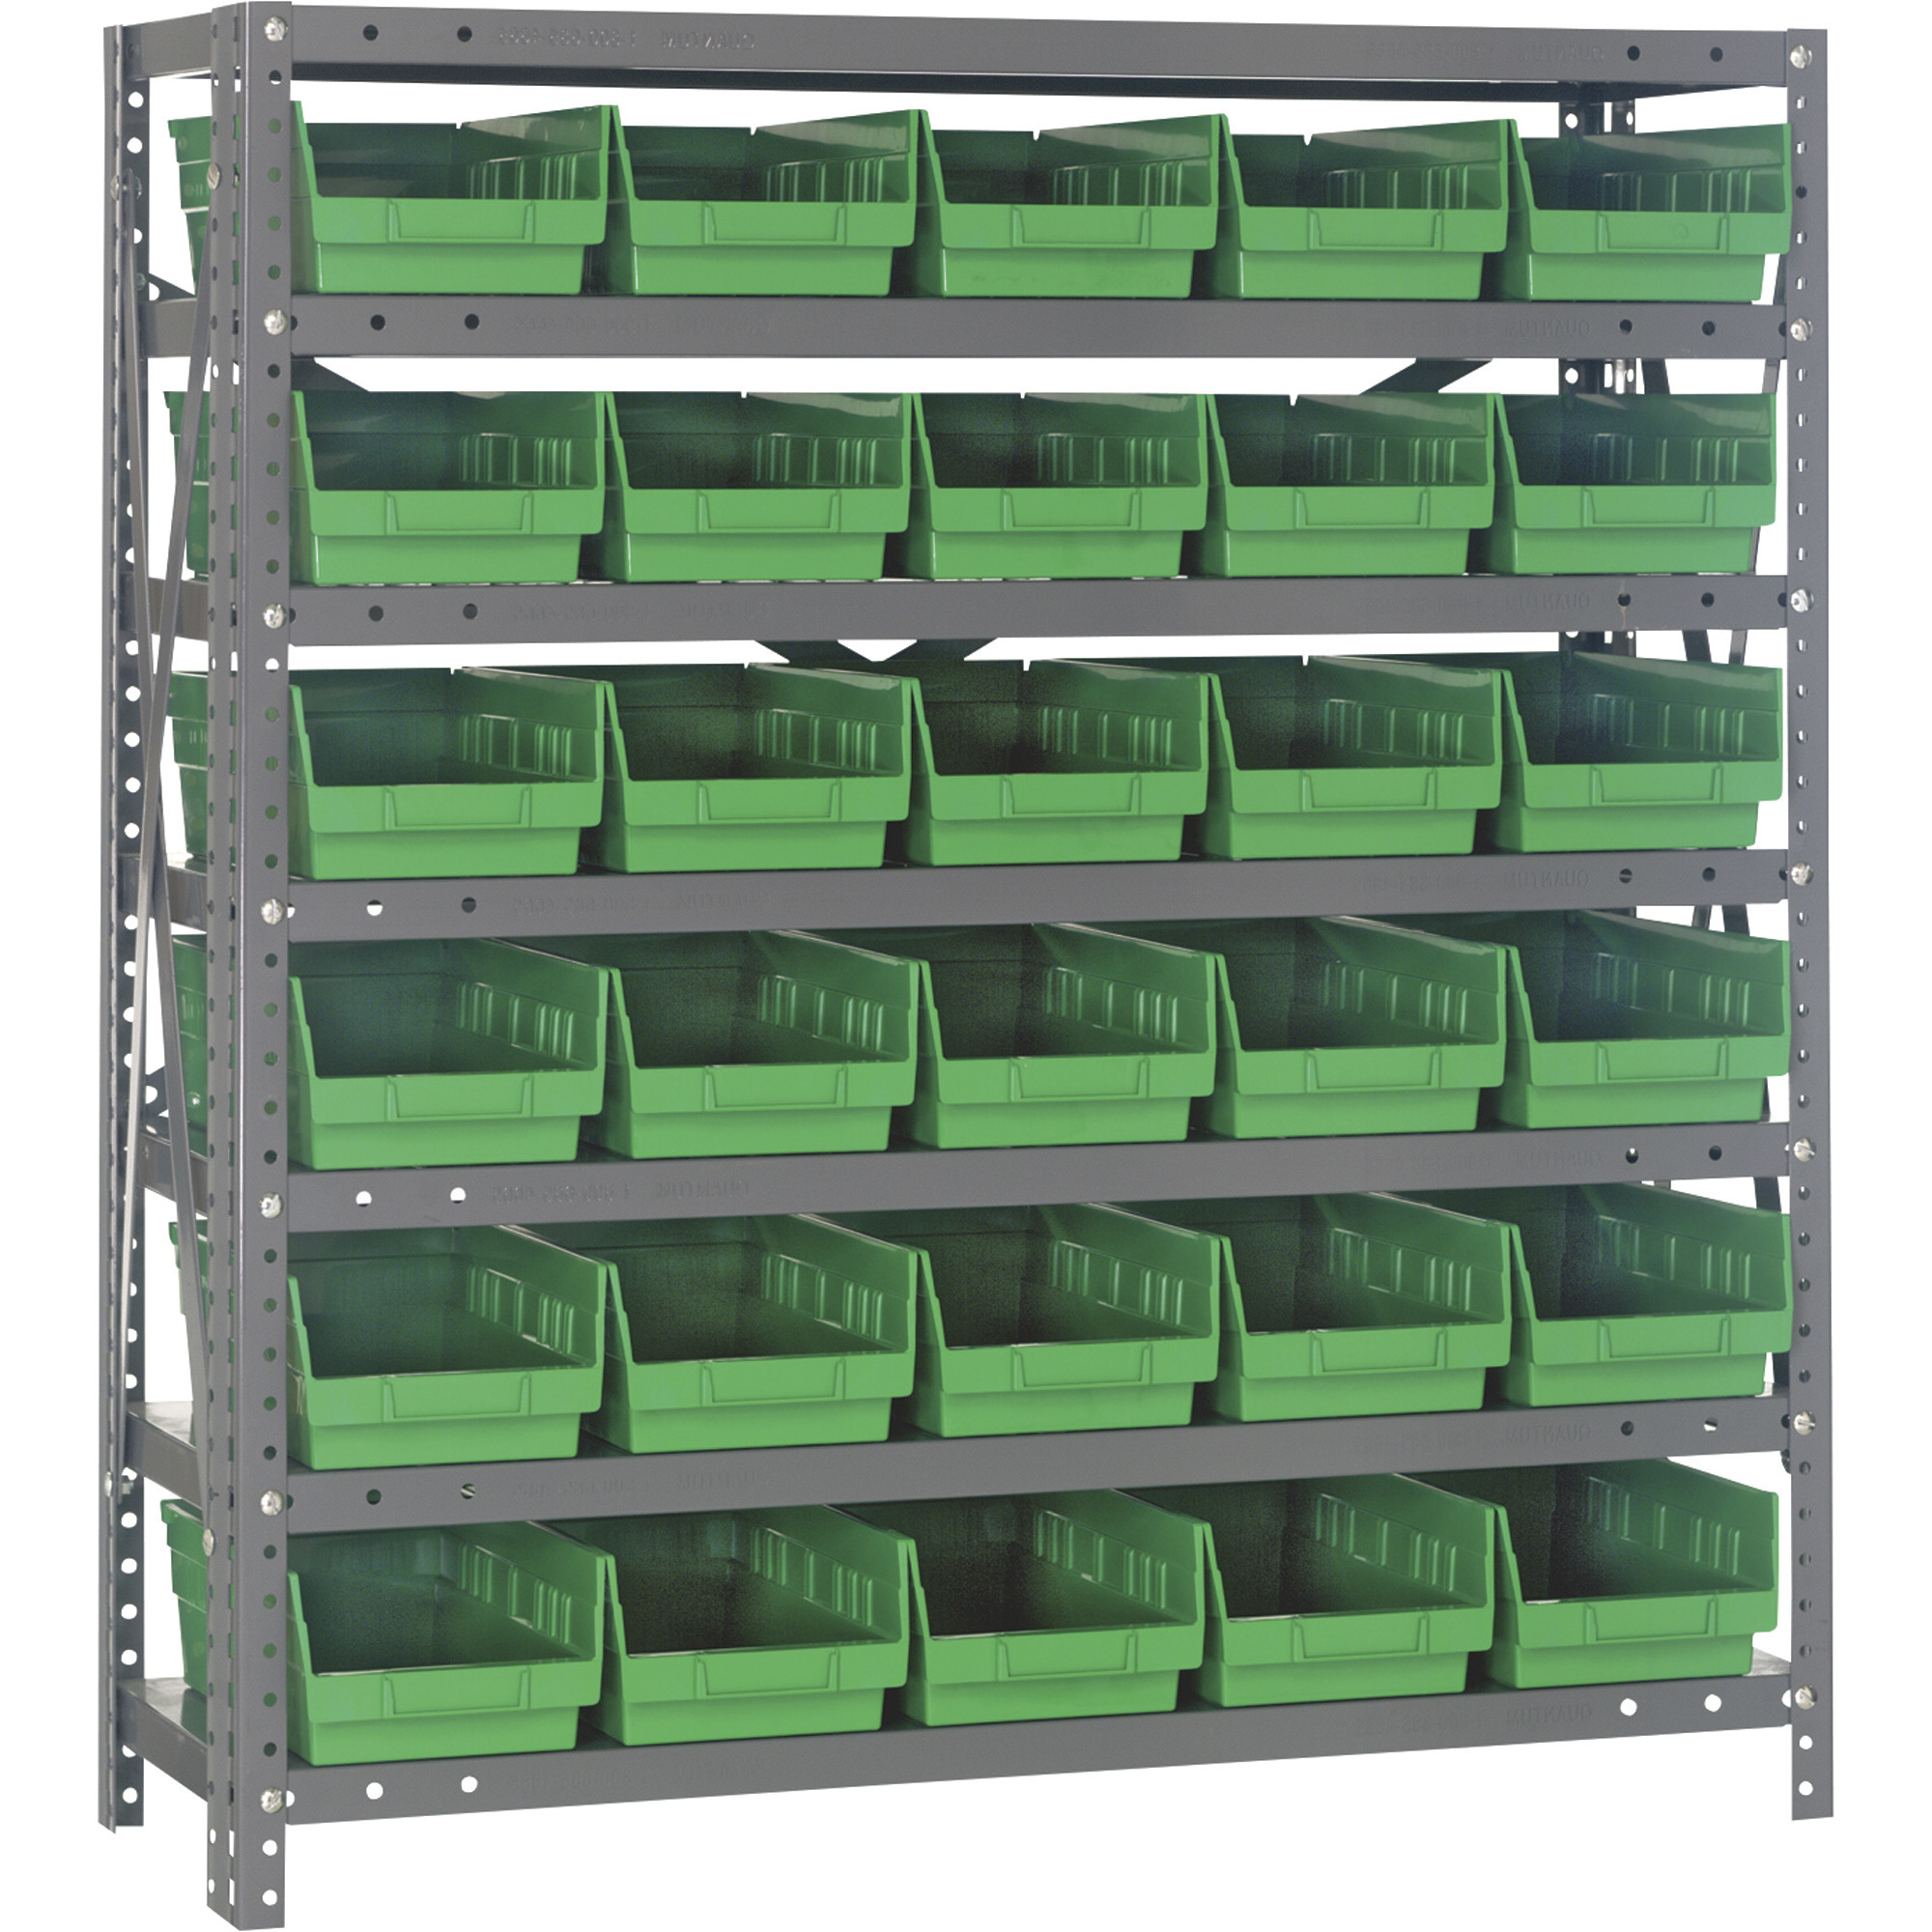 Quantum Storage Single Sided Steel Shelving Unit with 30 Bins, 36Inch W x 12Inch D x 39Inch H Rack Size, Green, Model 1239-102GN